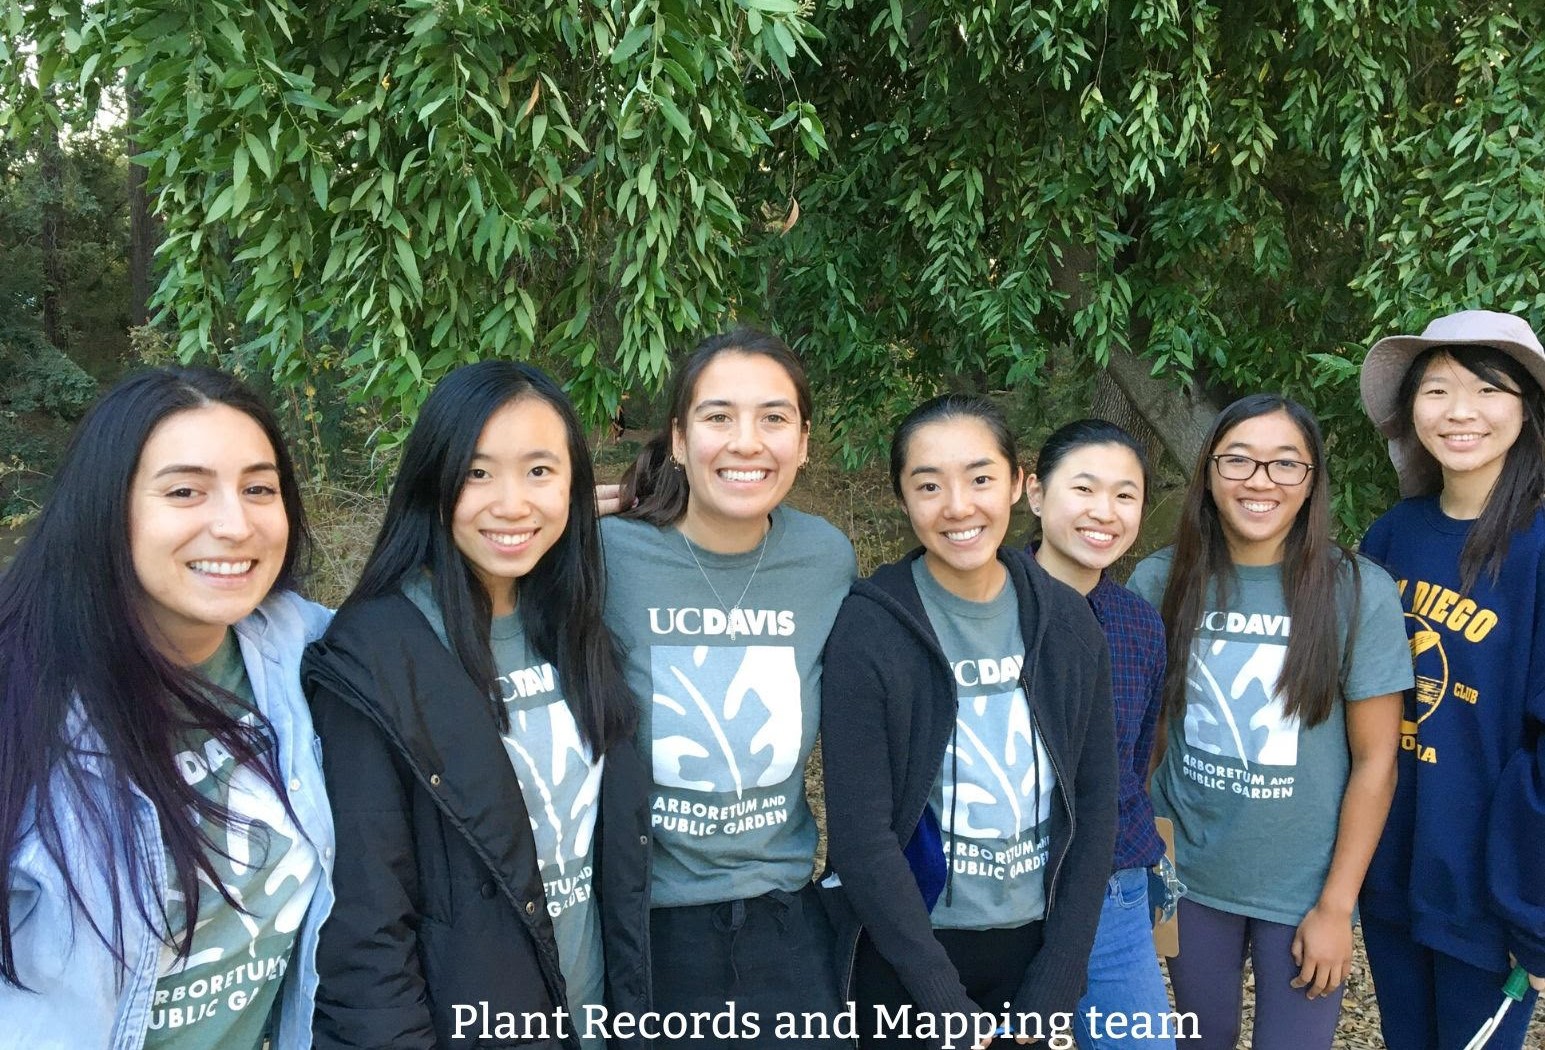 Plant Records and Mapping team group photo